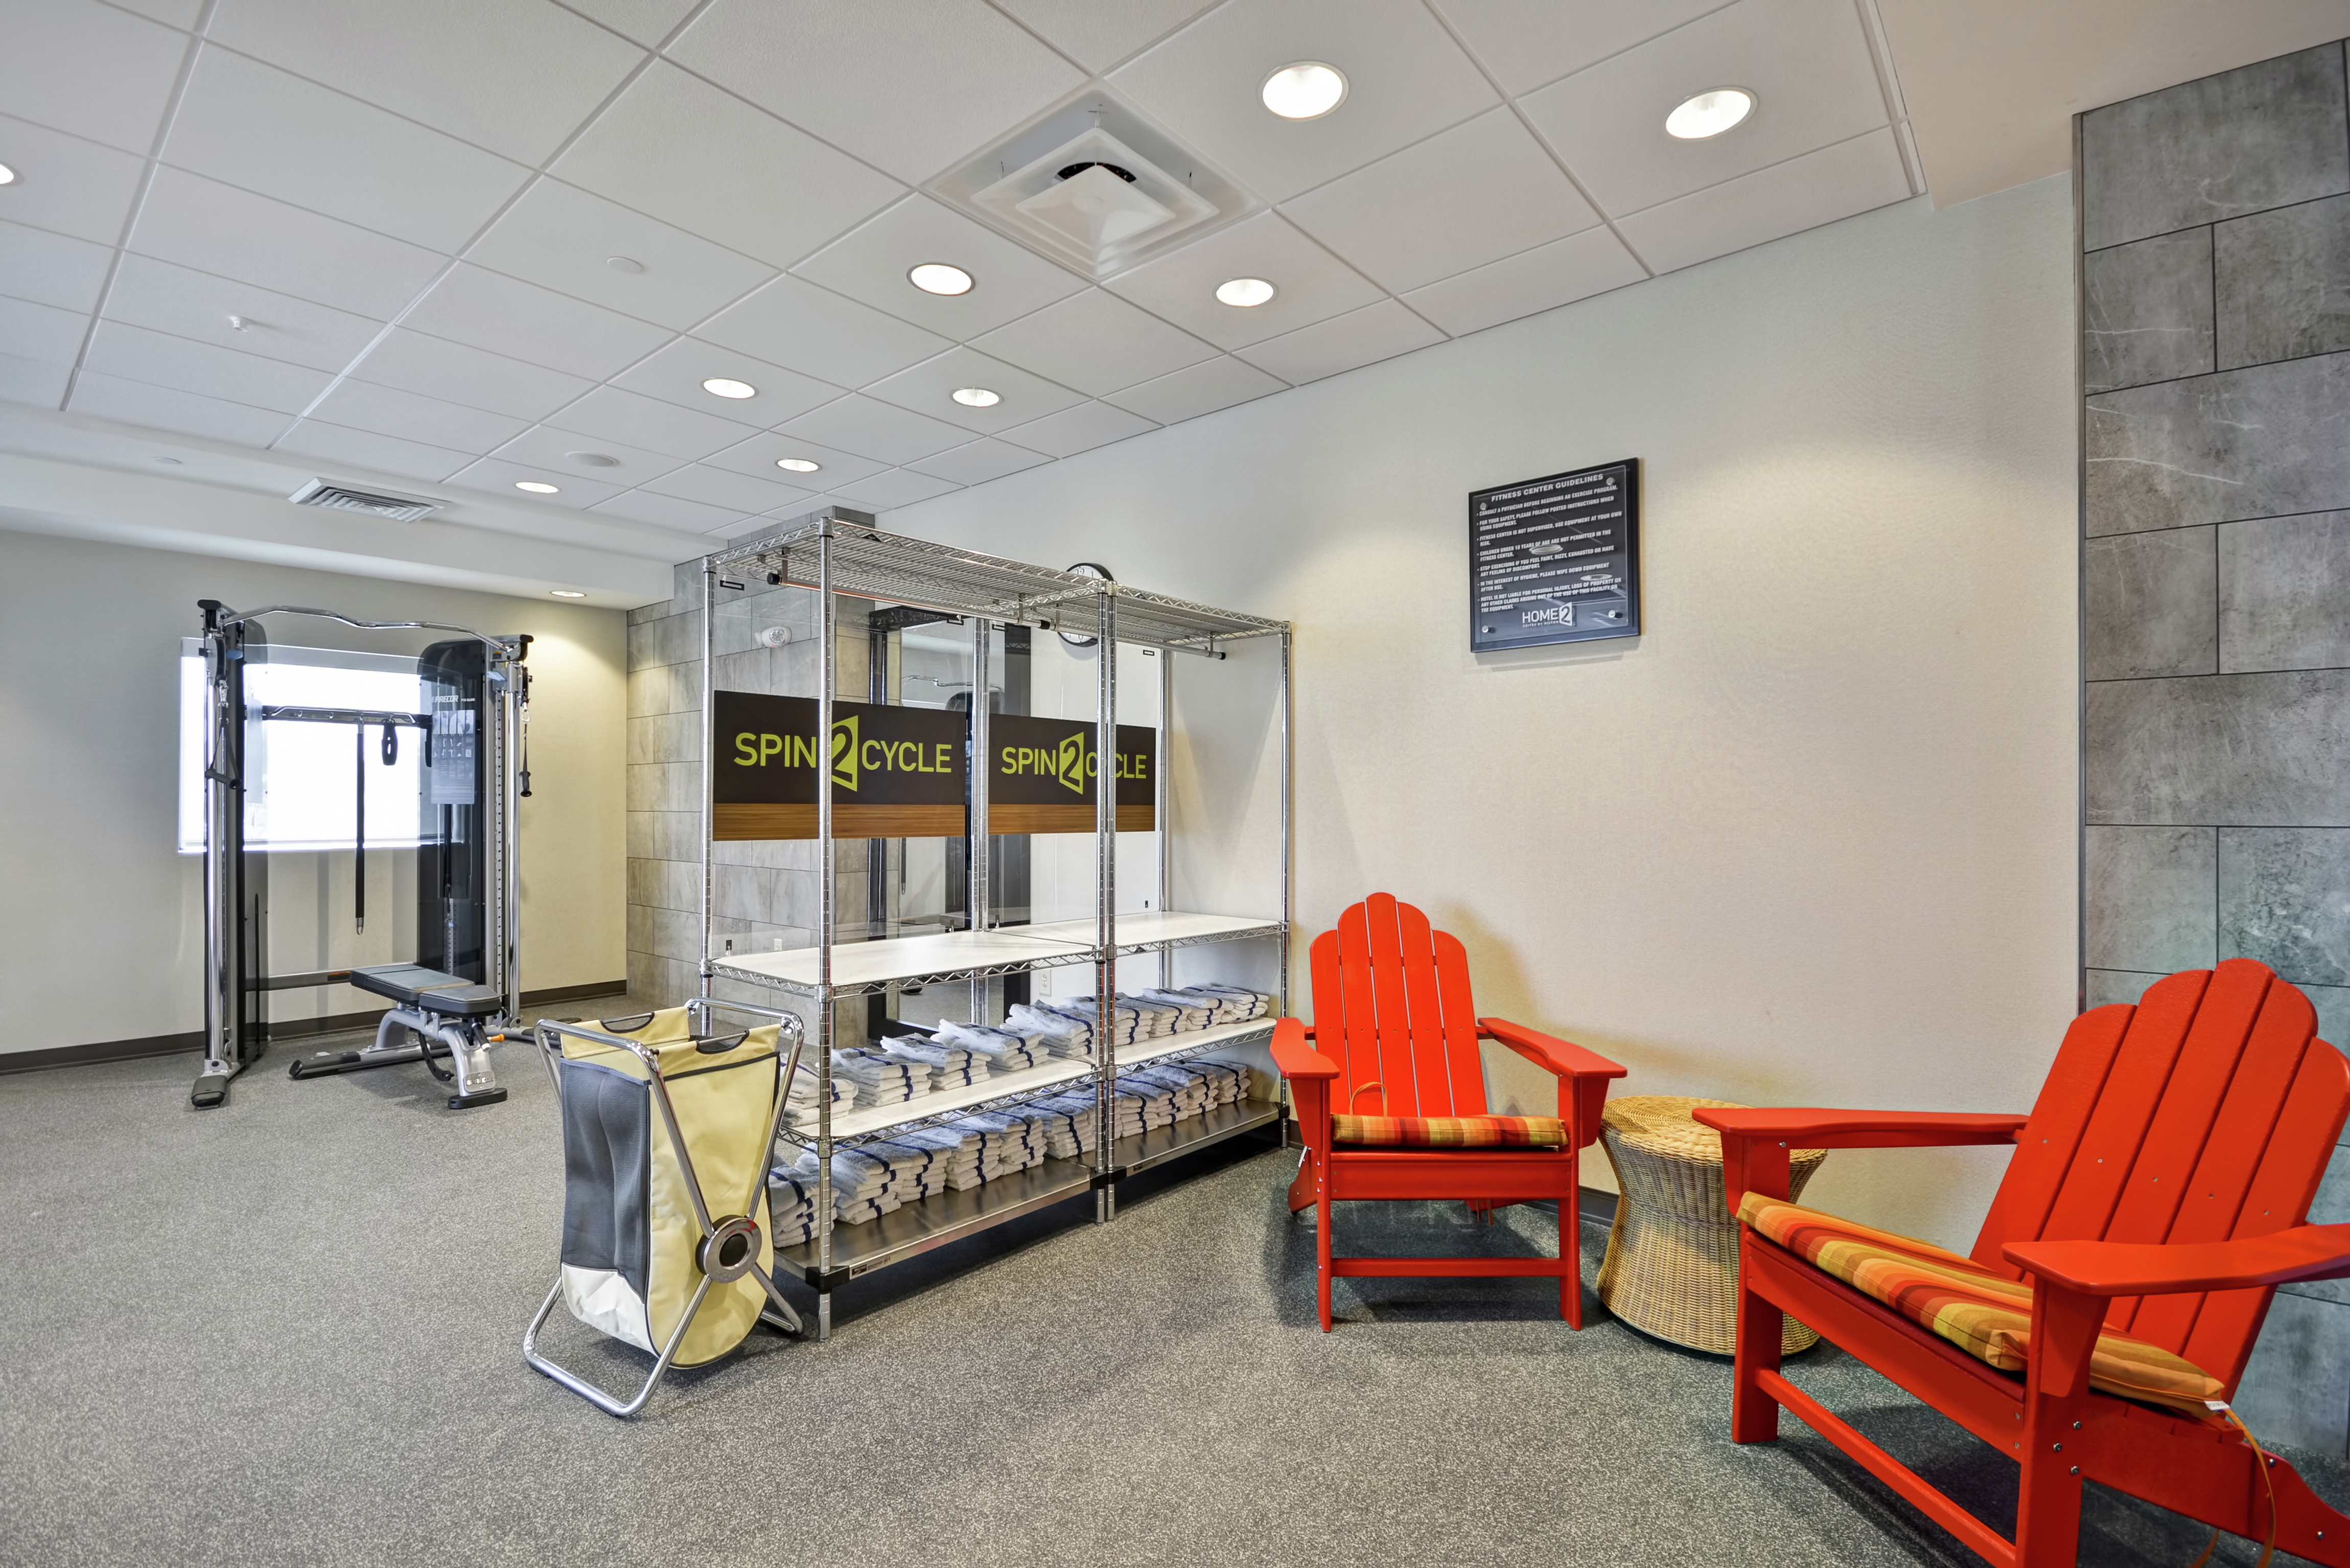 Towel Rack and Seating Area at Hotel Fitness Room